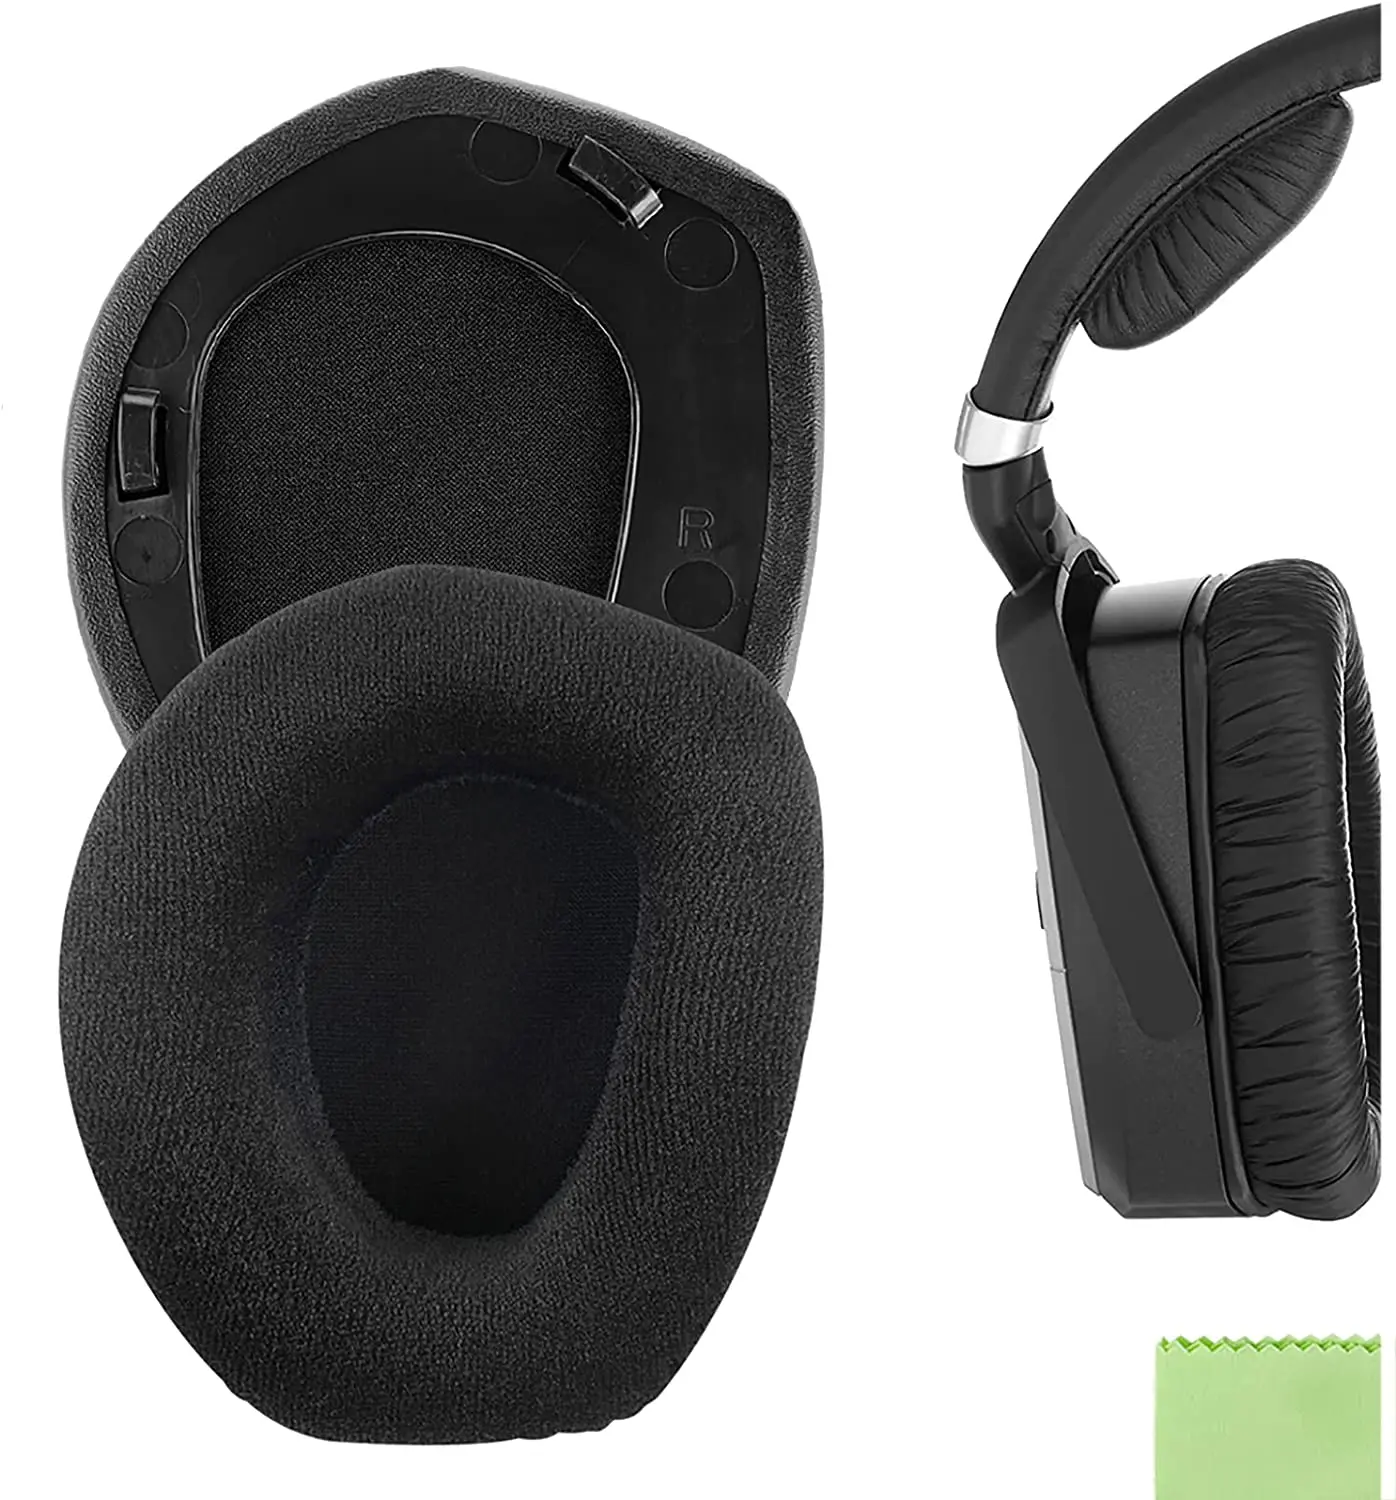 

Geekria Comfort Velour Replacement Ear Pads for Sennheiser RS165, RS175, HDR165, HDR175, RS185, HDR185, RS195, HDR195 Headphones